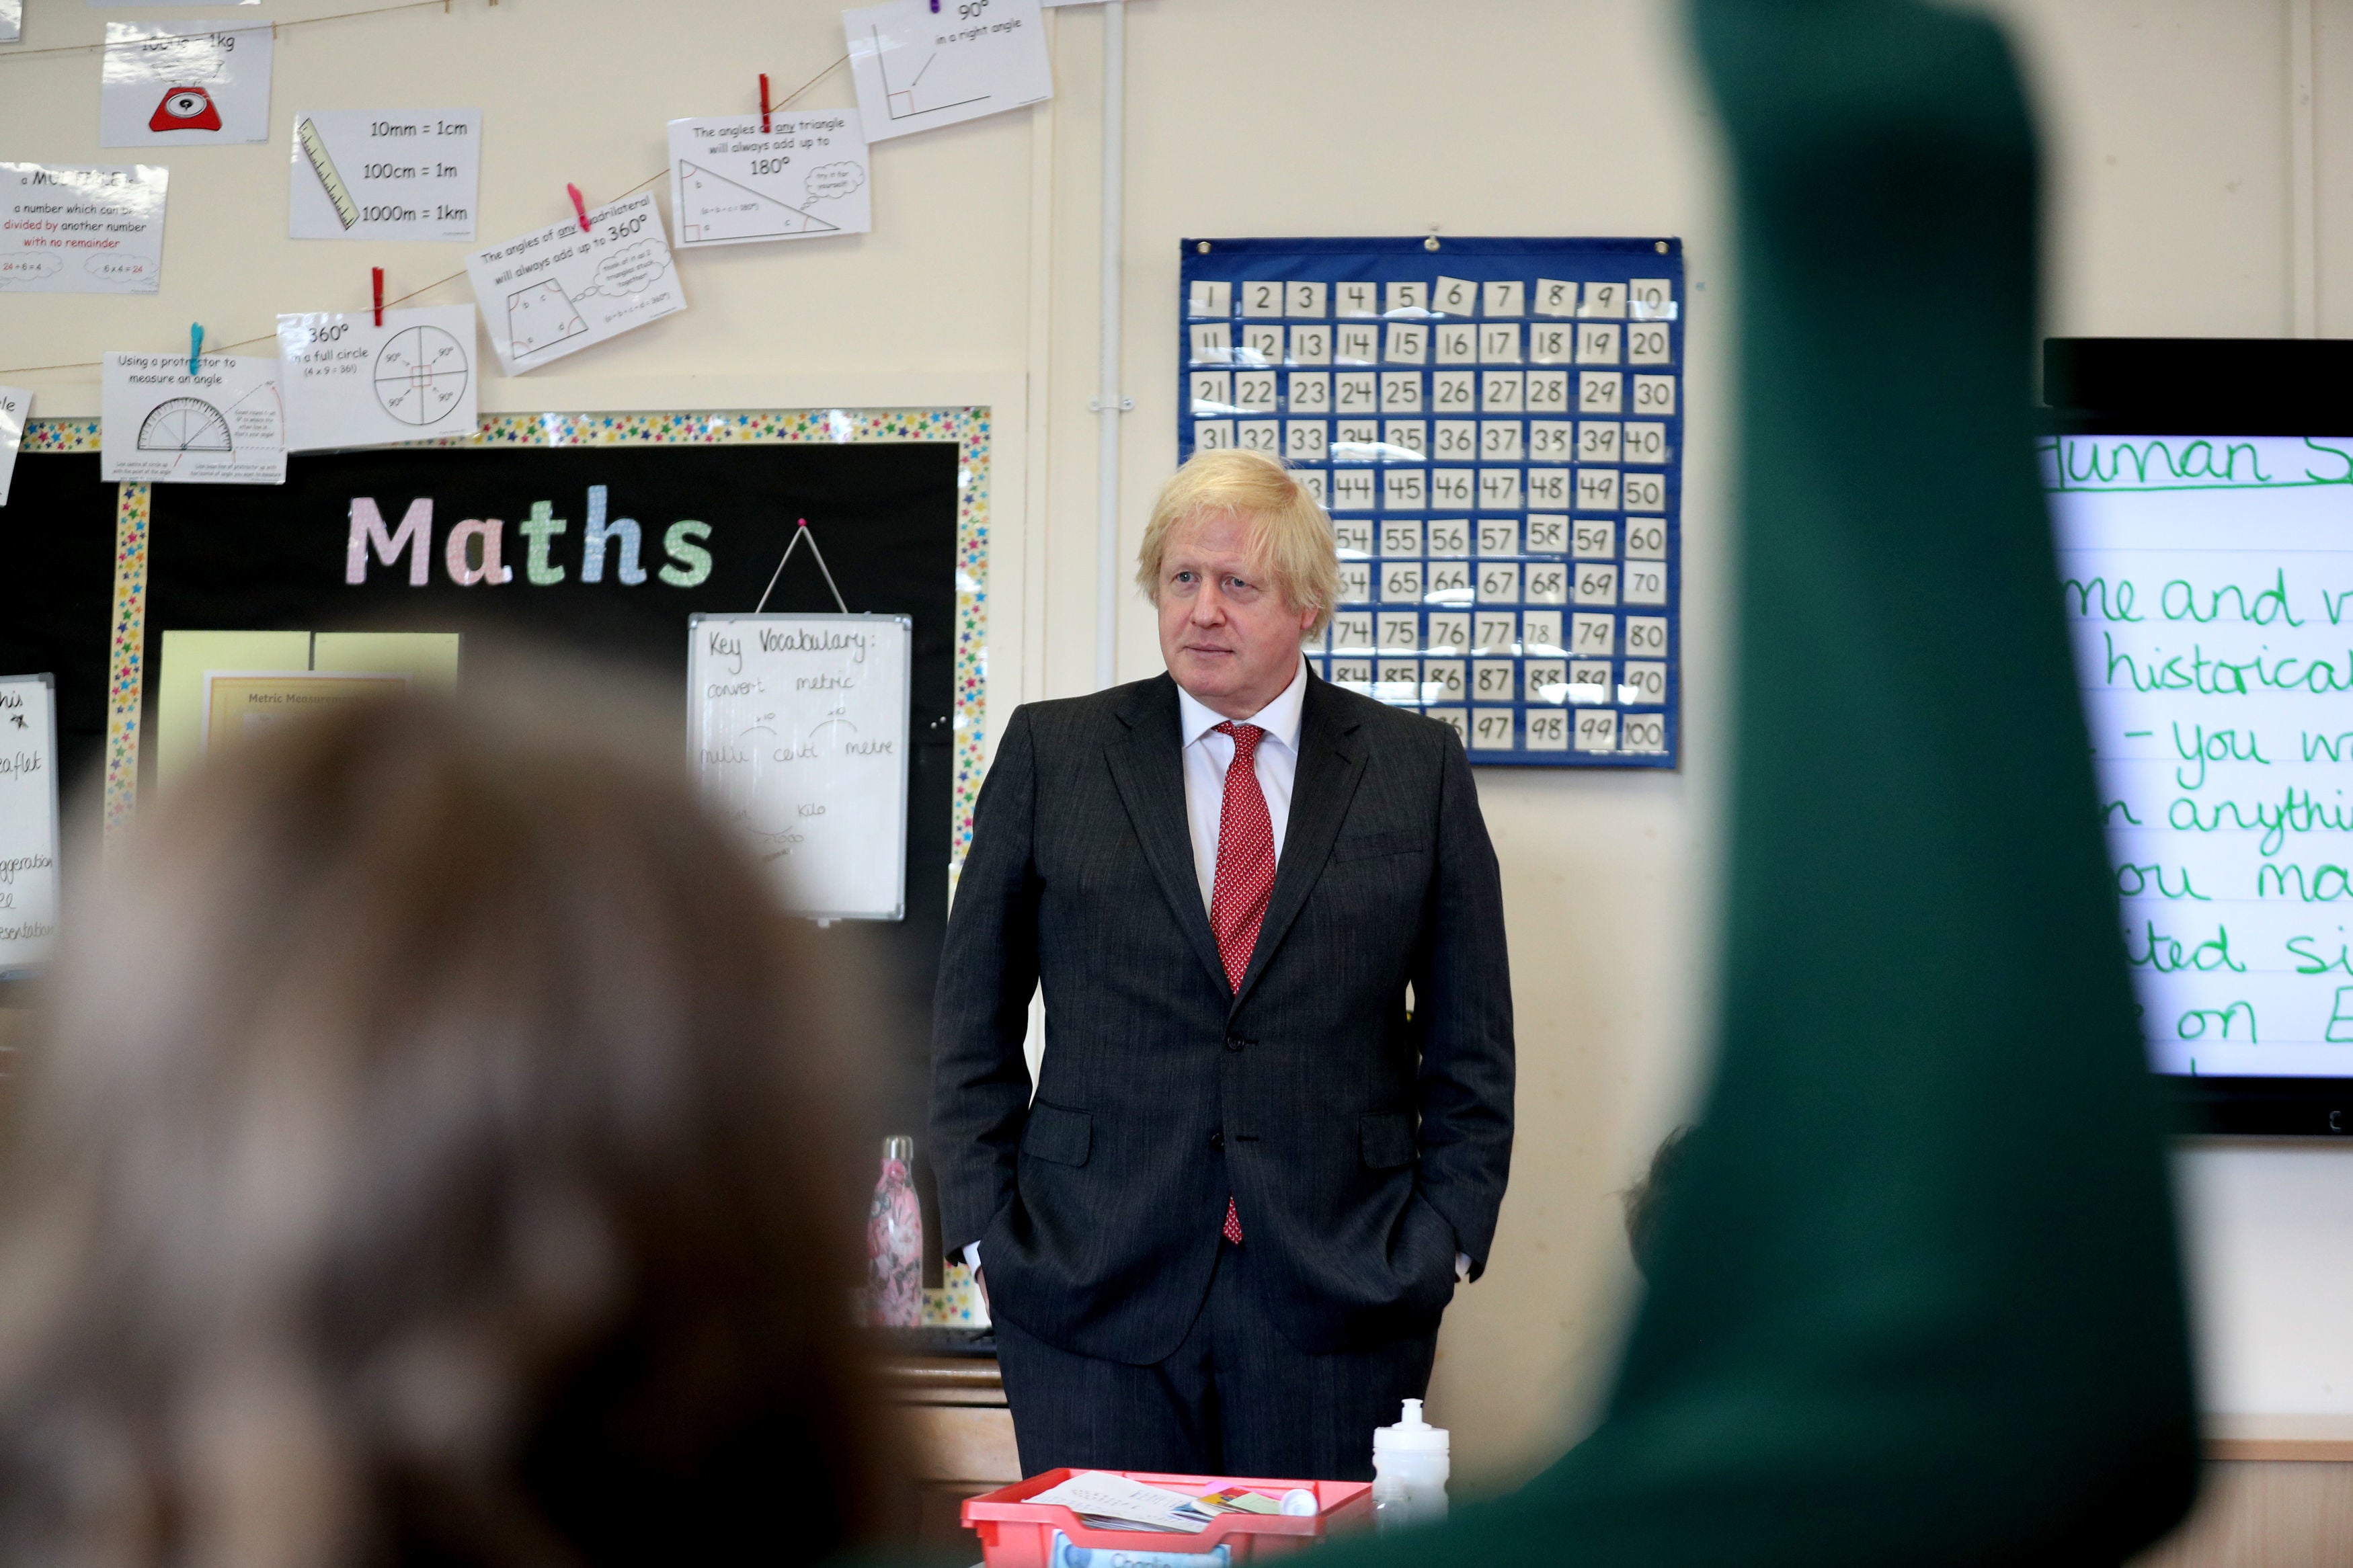 Johnson is being urged to invest heavily in measures including apprenticeships and tutoring